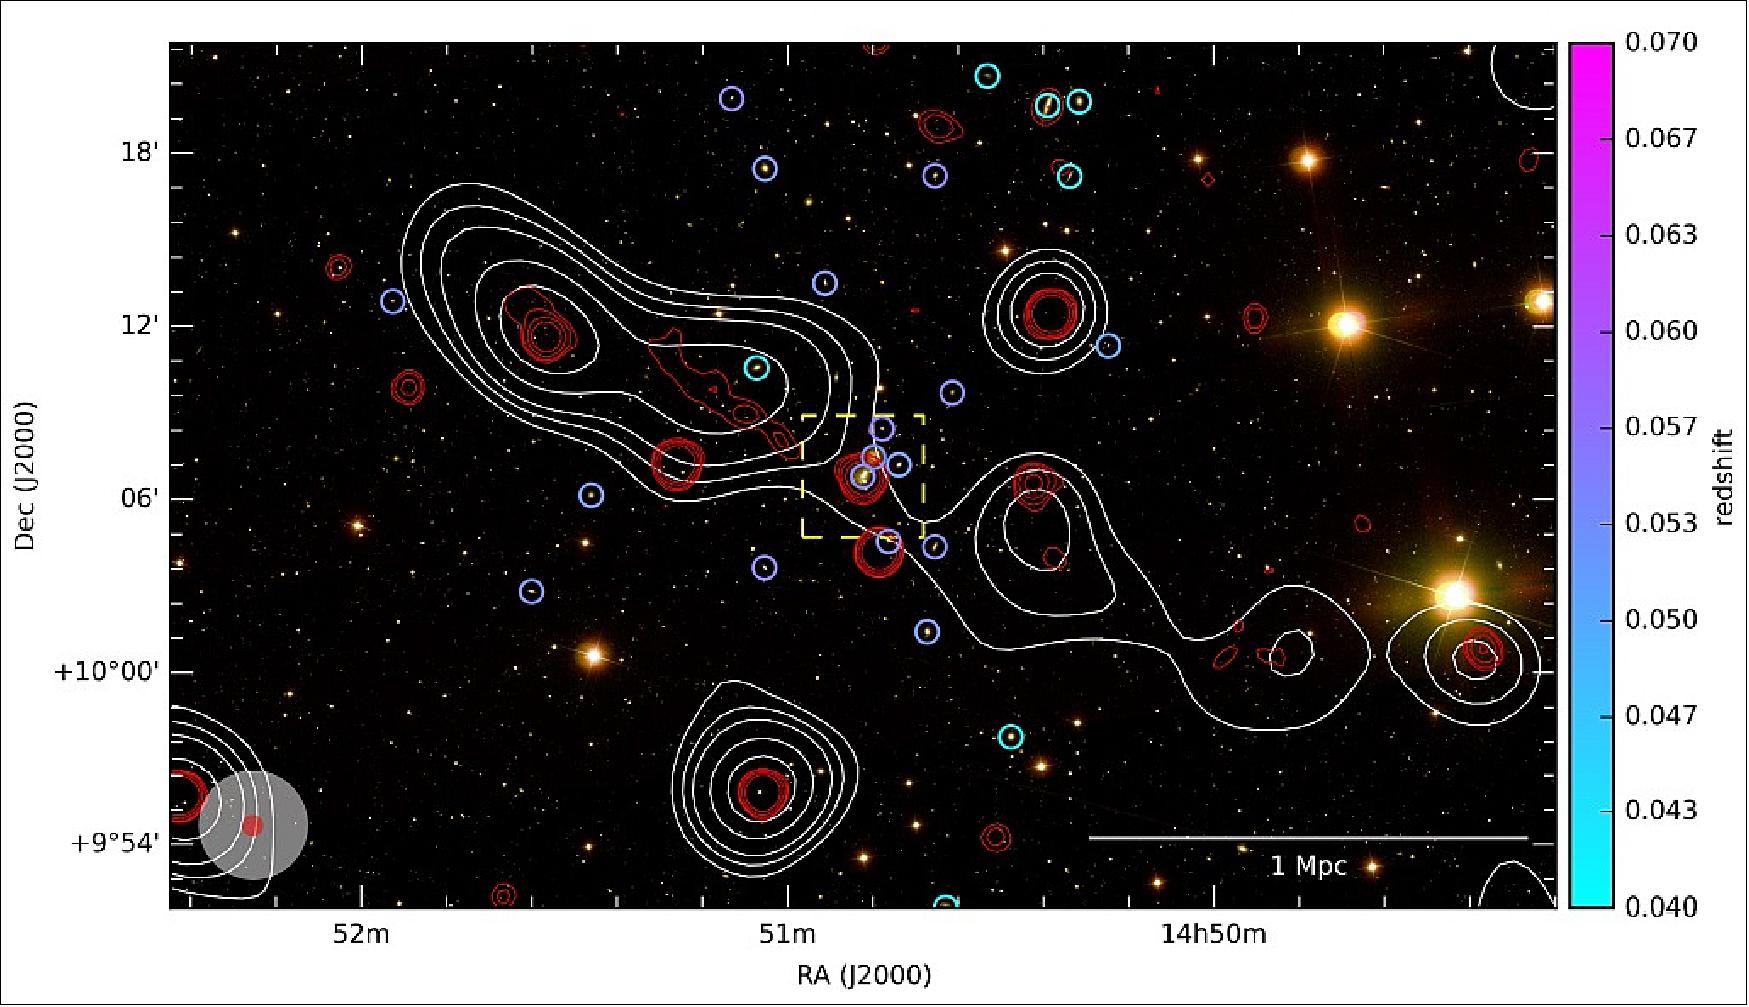 Figure 22: Background SDSS (Sloan Digital Sky Survey) image (composite from bands g, r and i) overlaid with white MSSS contours of the GRG at 2, 3, 4, 6 and 8 times the RMS noise (34 mJy/beam). NVSS (NRAO VLA Sky Survey) contours are overlaid in red at 3, 5, 10 and 20 times the RMS noise (0.55 mJy/beam) revealing a bright part of the radio jet towards the north-east. The beam sizes are shown in the lower left (image credit: LOFAR study team)